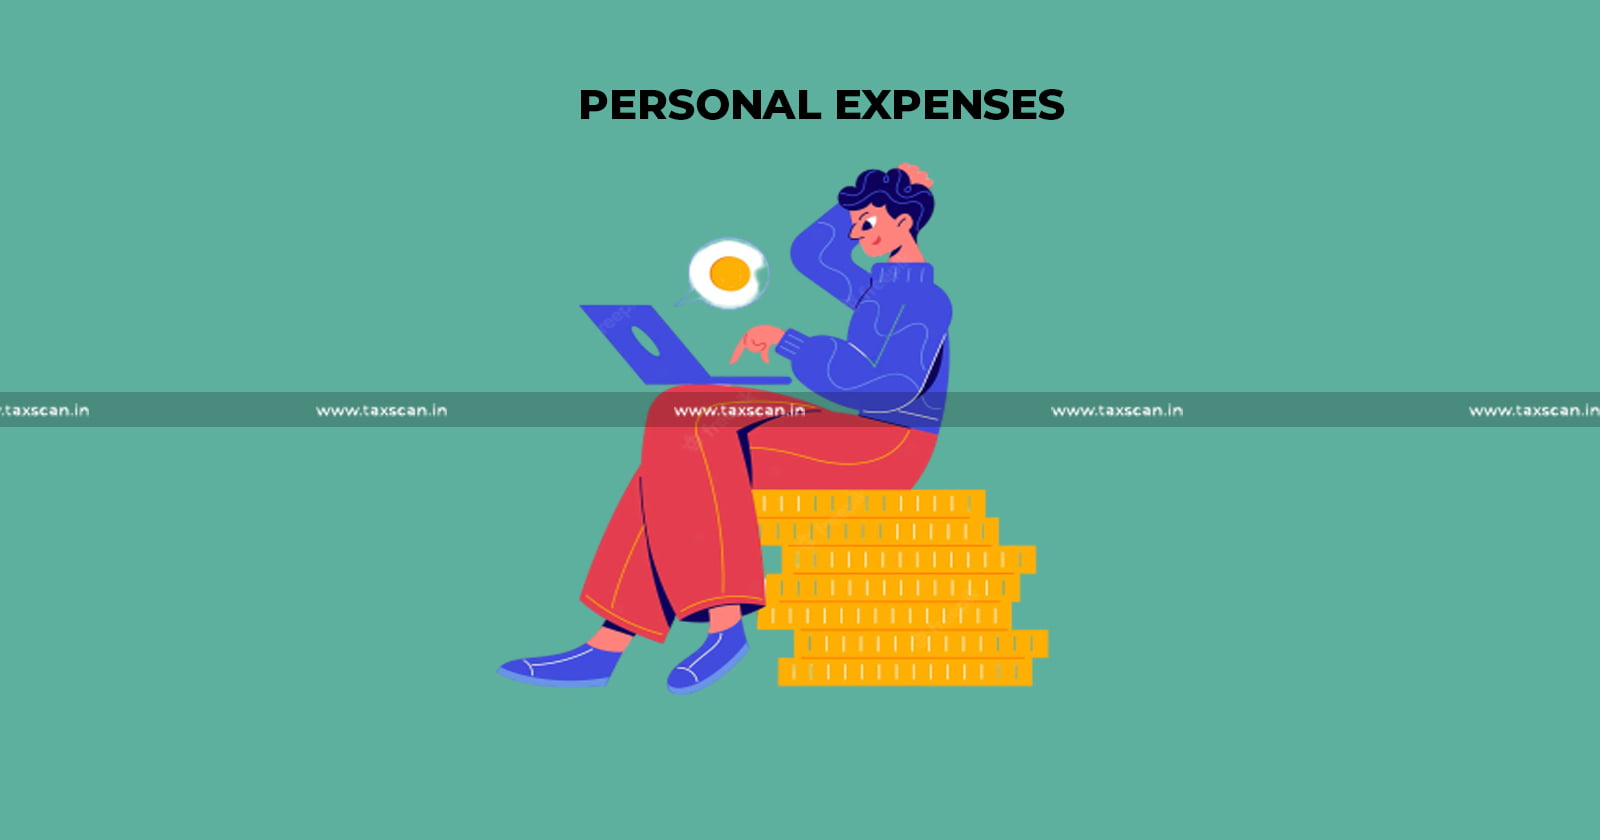 ITAT - ITAT Delhi - Income Tax - Taxation of personal expenses - Section 271D of Income Tax Act - taxscan